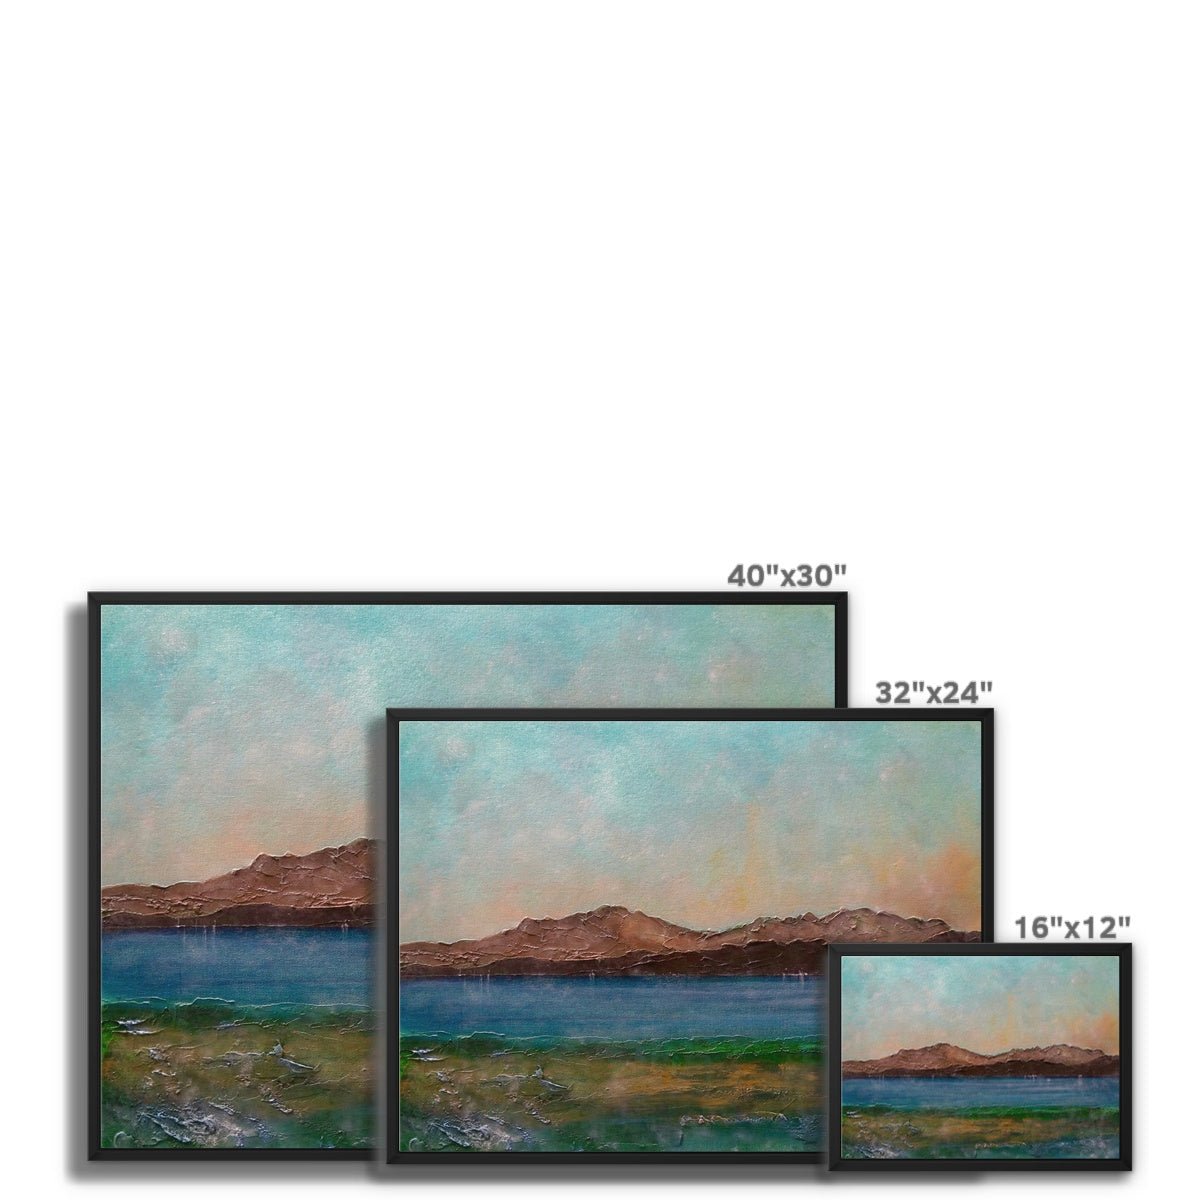 Arran From Scalpsie Bay Painting | Framed Canvas From Scotland-Floating Framed Canvas Prints-Arran Art Gallery-Paintings, Prints, Homeware, Art Gifts From Scotland By Scottish Artist Kevin Hunter